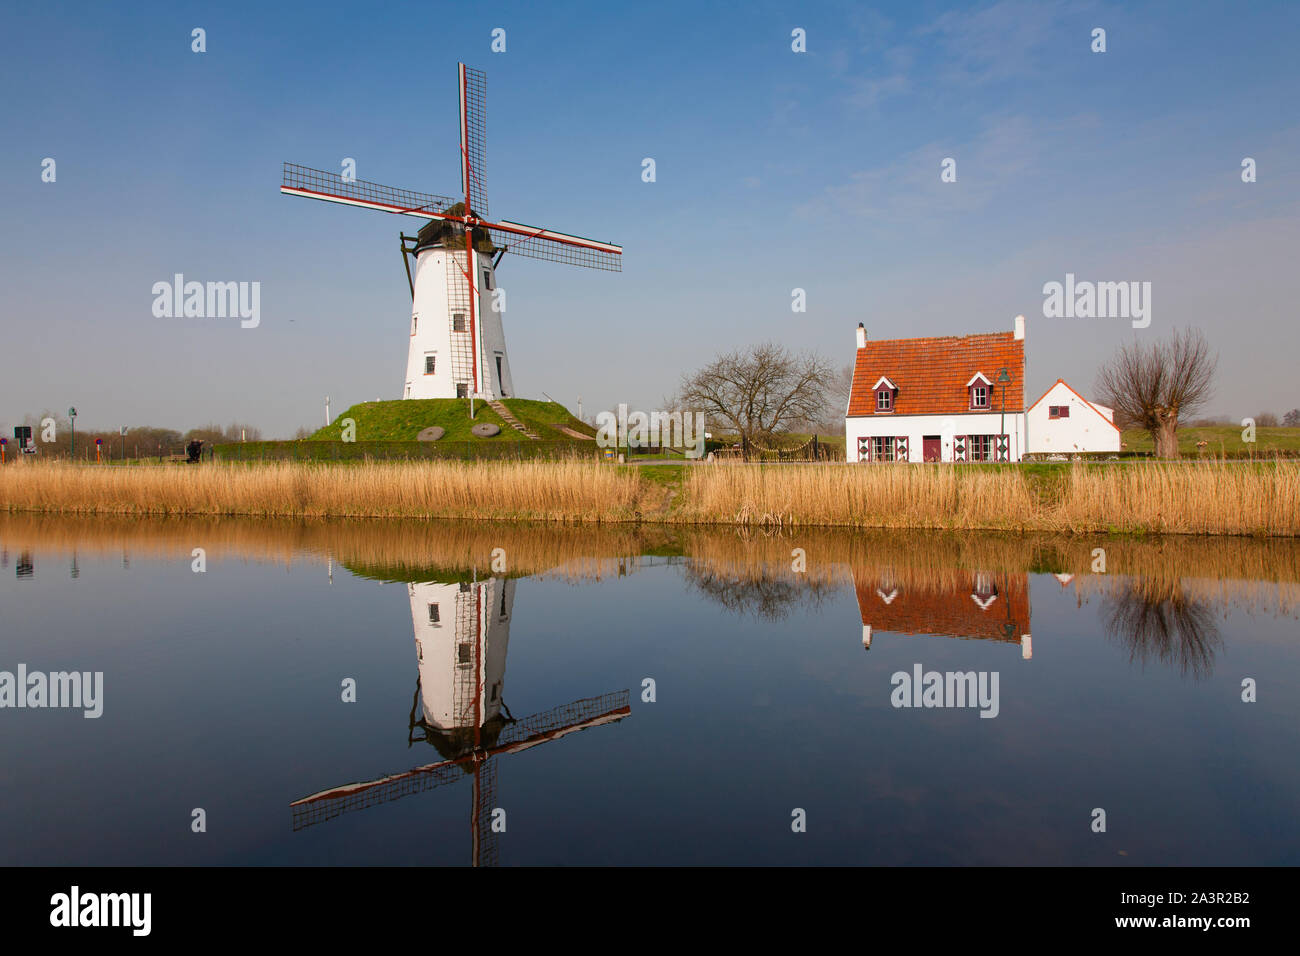 Windmill and house, Damse Vaart Canal, Belgium Stock Photo